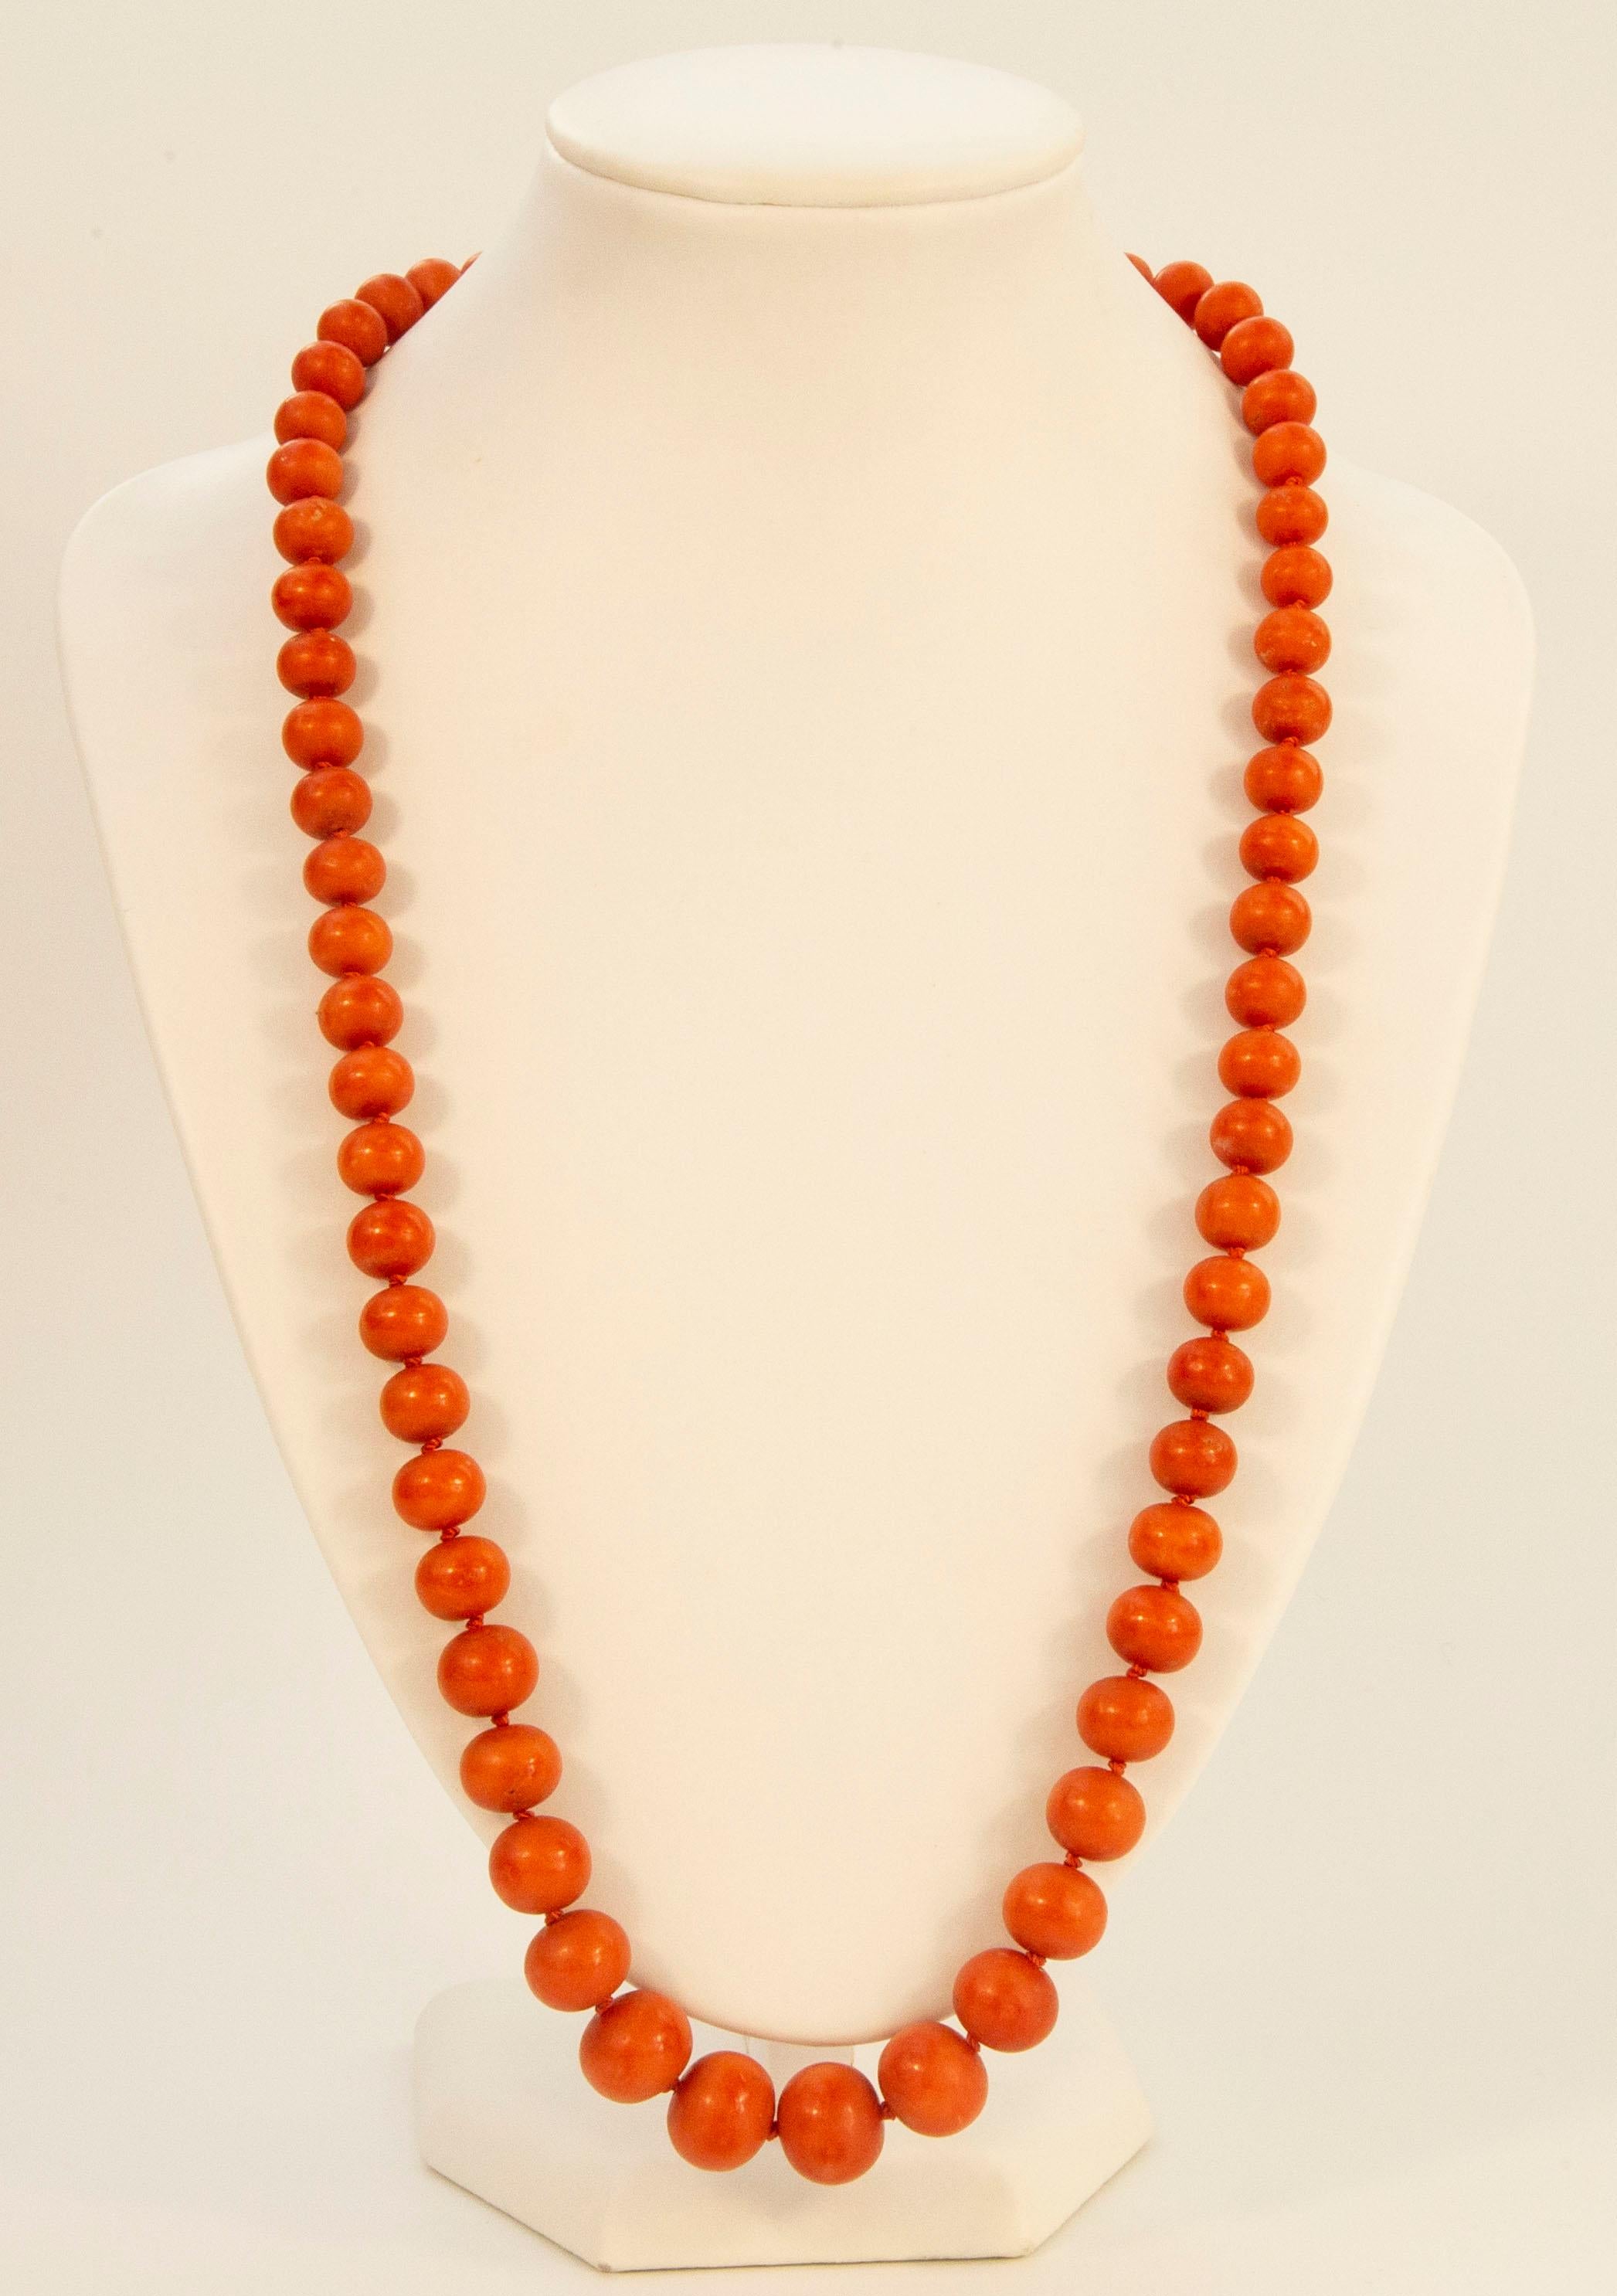 An antique one strand genuine red coral  (Corallium Rubrum*) necklace with a 14 karat yellow gold lock. The beads are graduated and each bead is individually strung on a silk. The necklace was made at the beginning of the 20th century in the